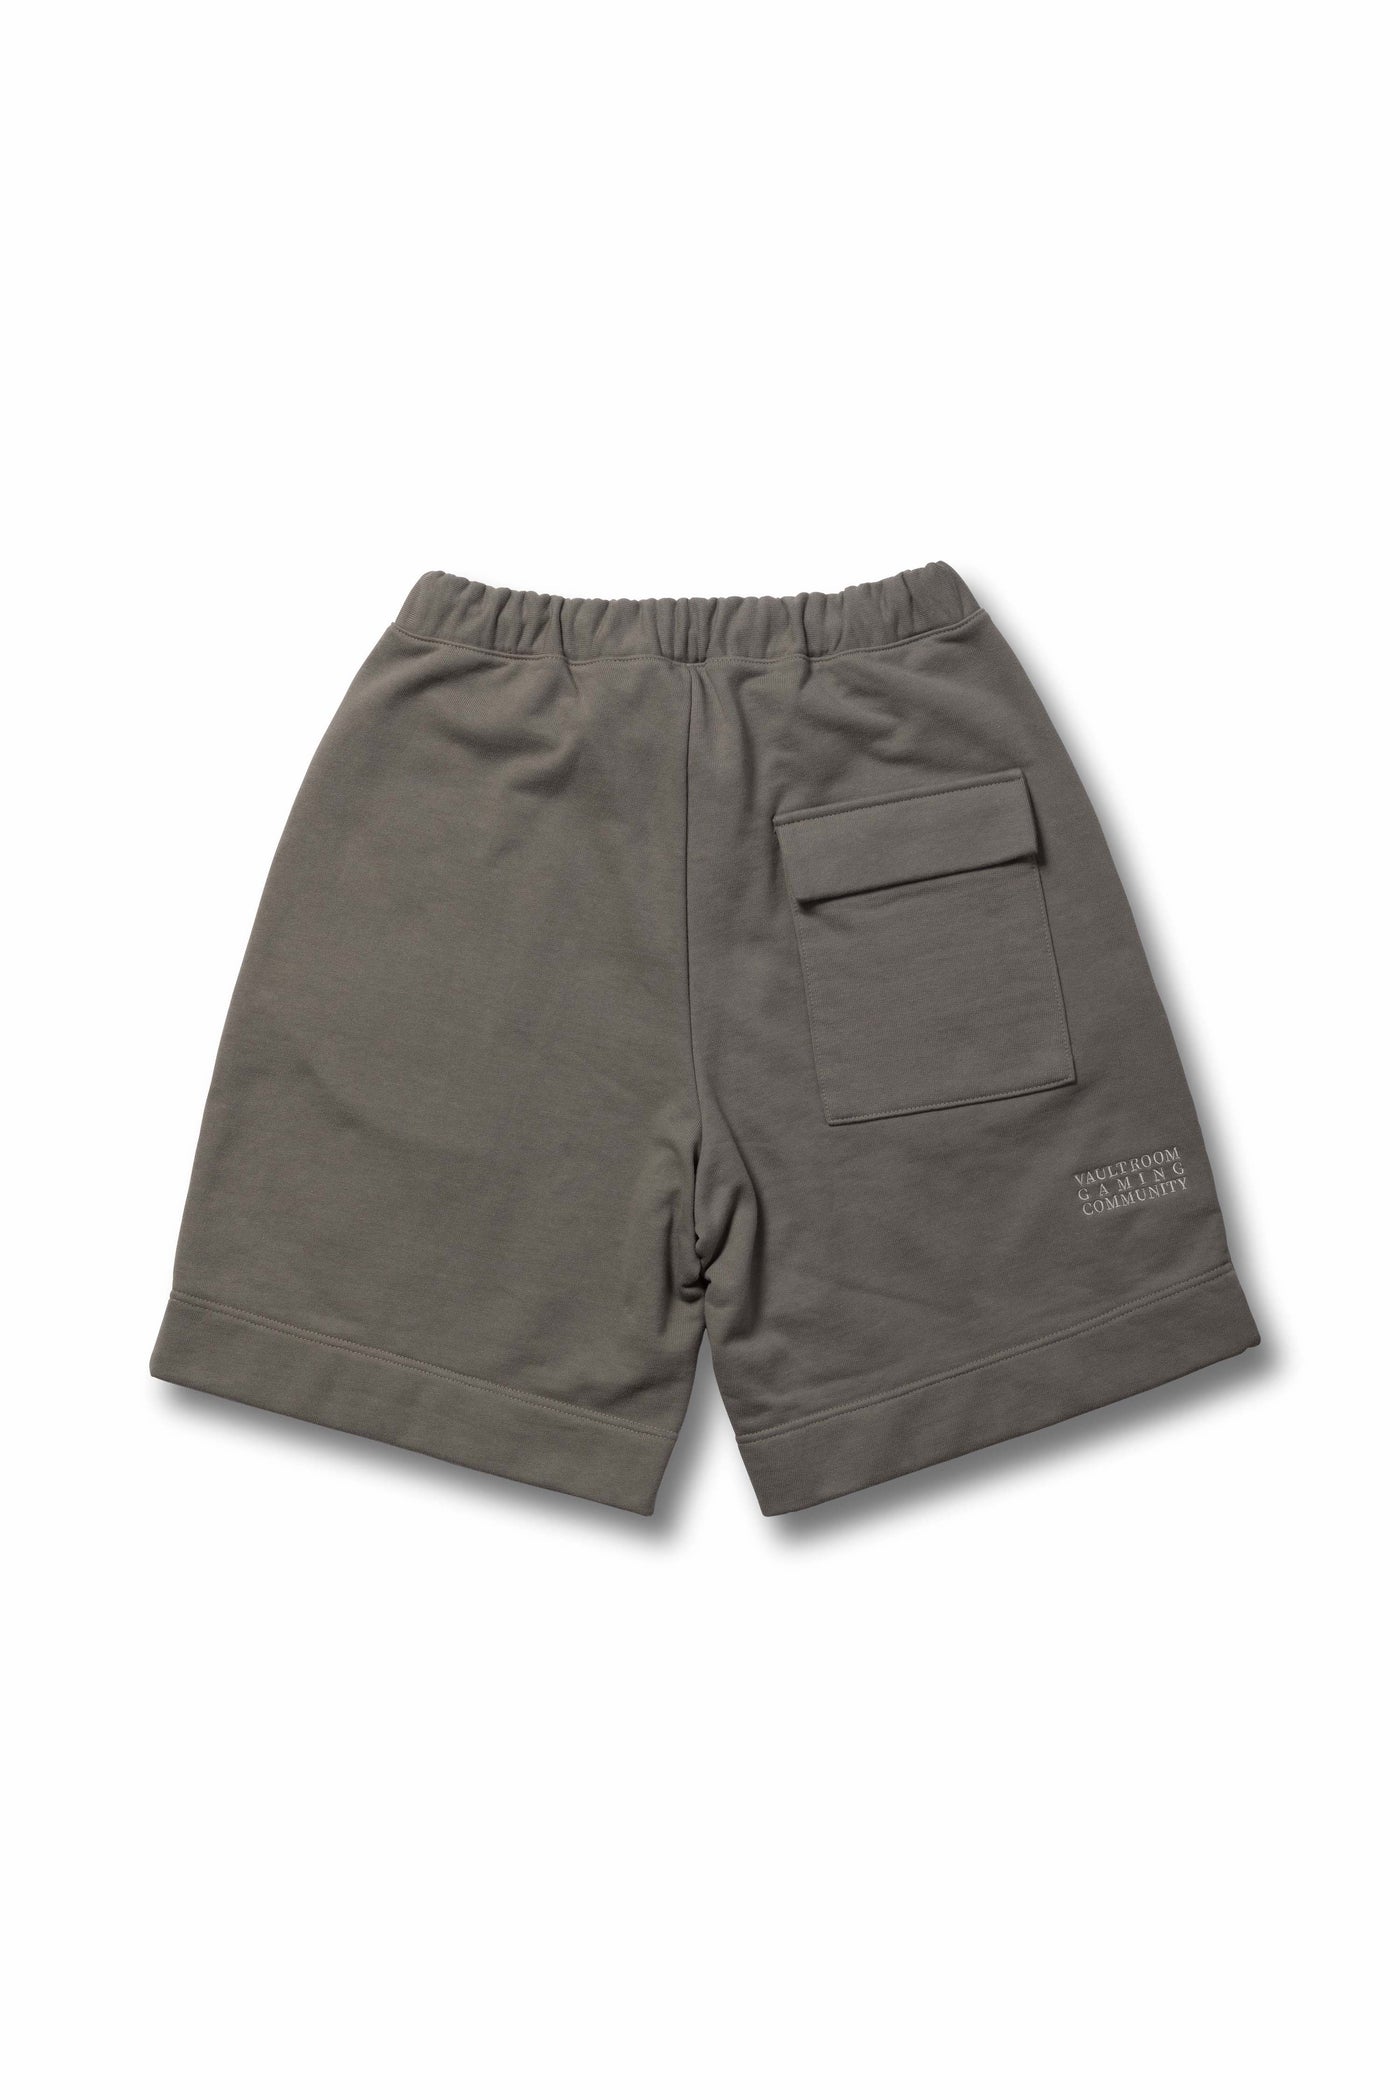 VGC FRENCH TERRY SHORTS / CHARCOAL